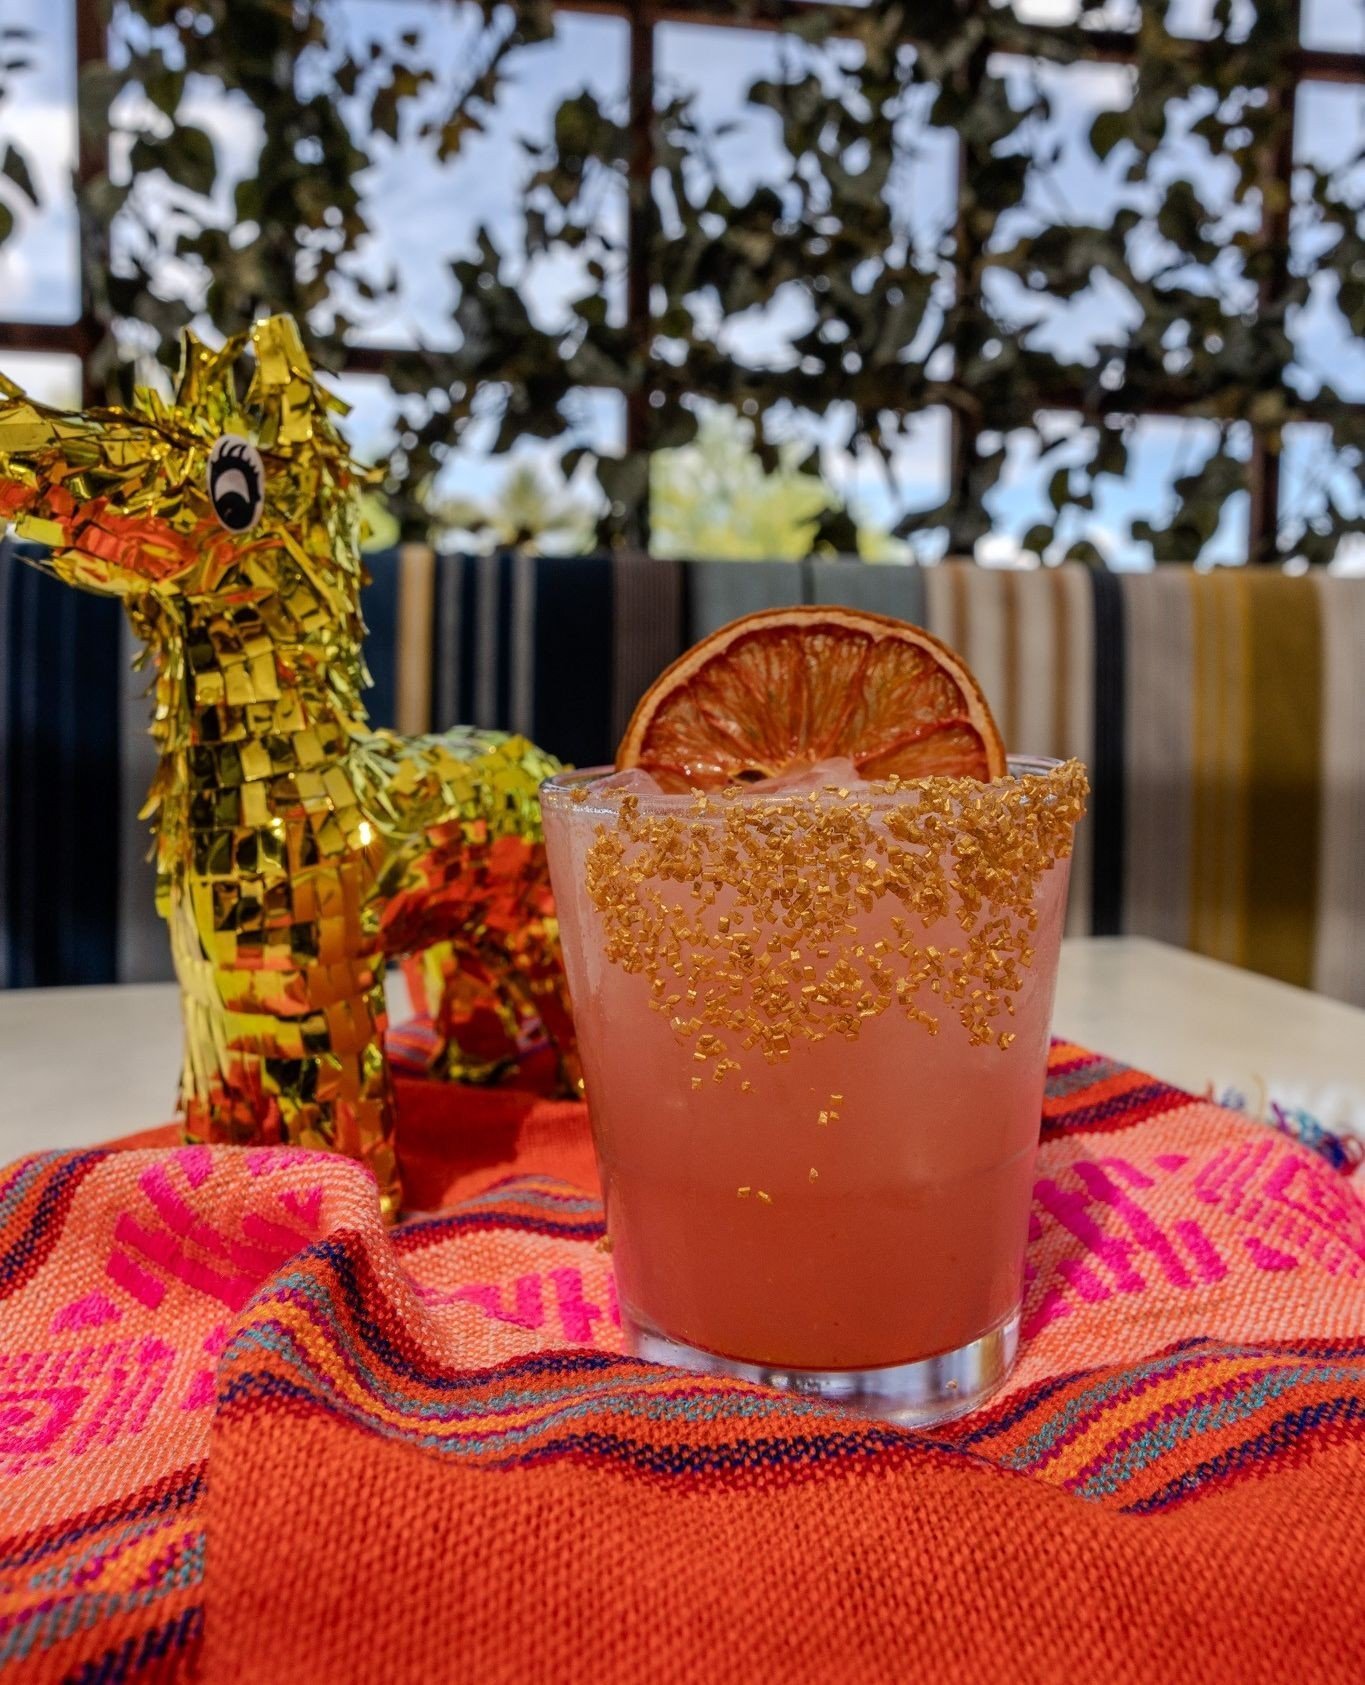 It's Cinco De Mayo...⁠
⁠
OF COURSE WE'RE GONNA HAVE A CUTE, DELICIOUS SIGNATURE COCKTAIL 🇲🇽🥳⁠
⁠
The Cincorita will be available only for this weekend, get her while she lasts... you don't want to miss out on this one 🤩⁠
⁠
Available all weekend lo